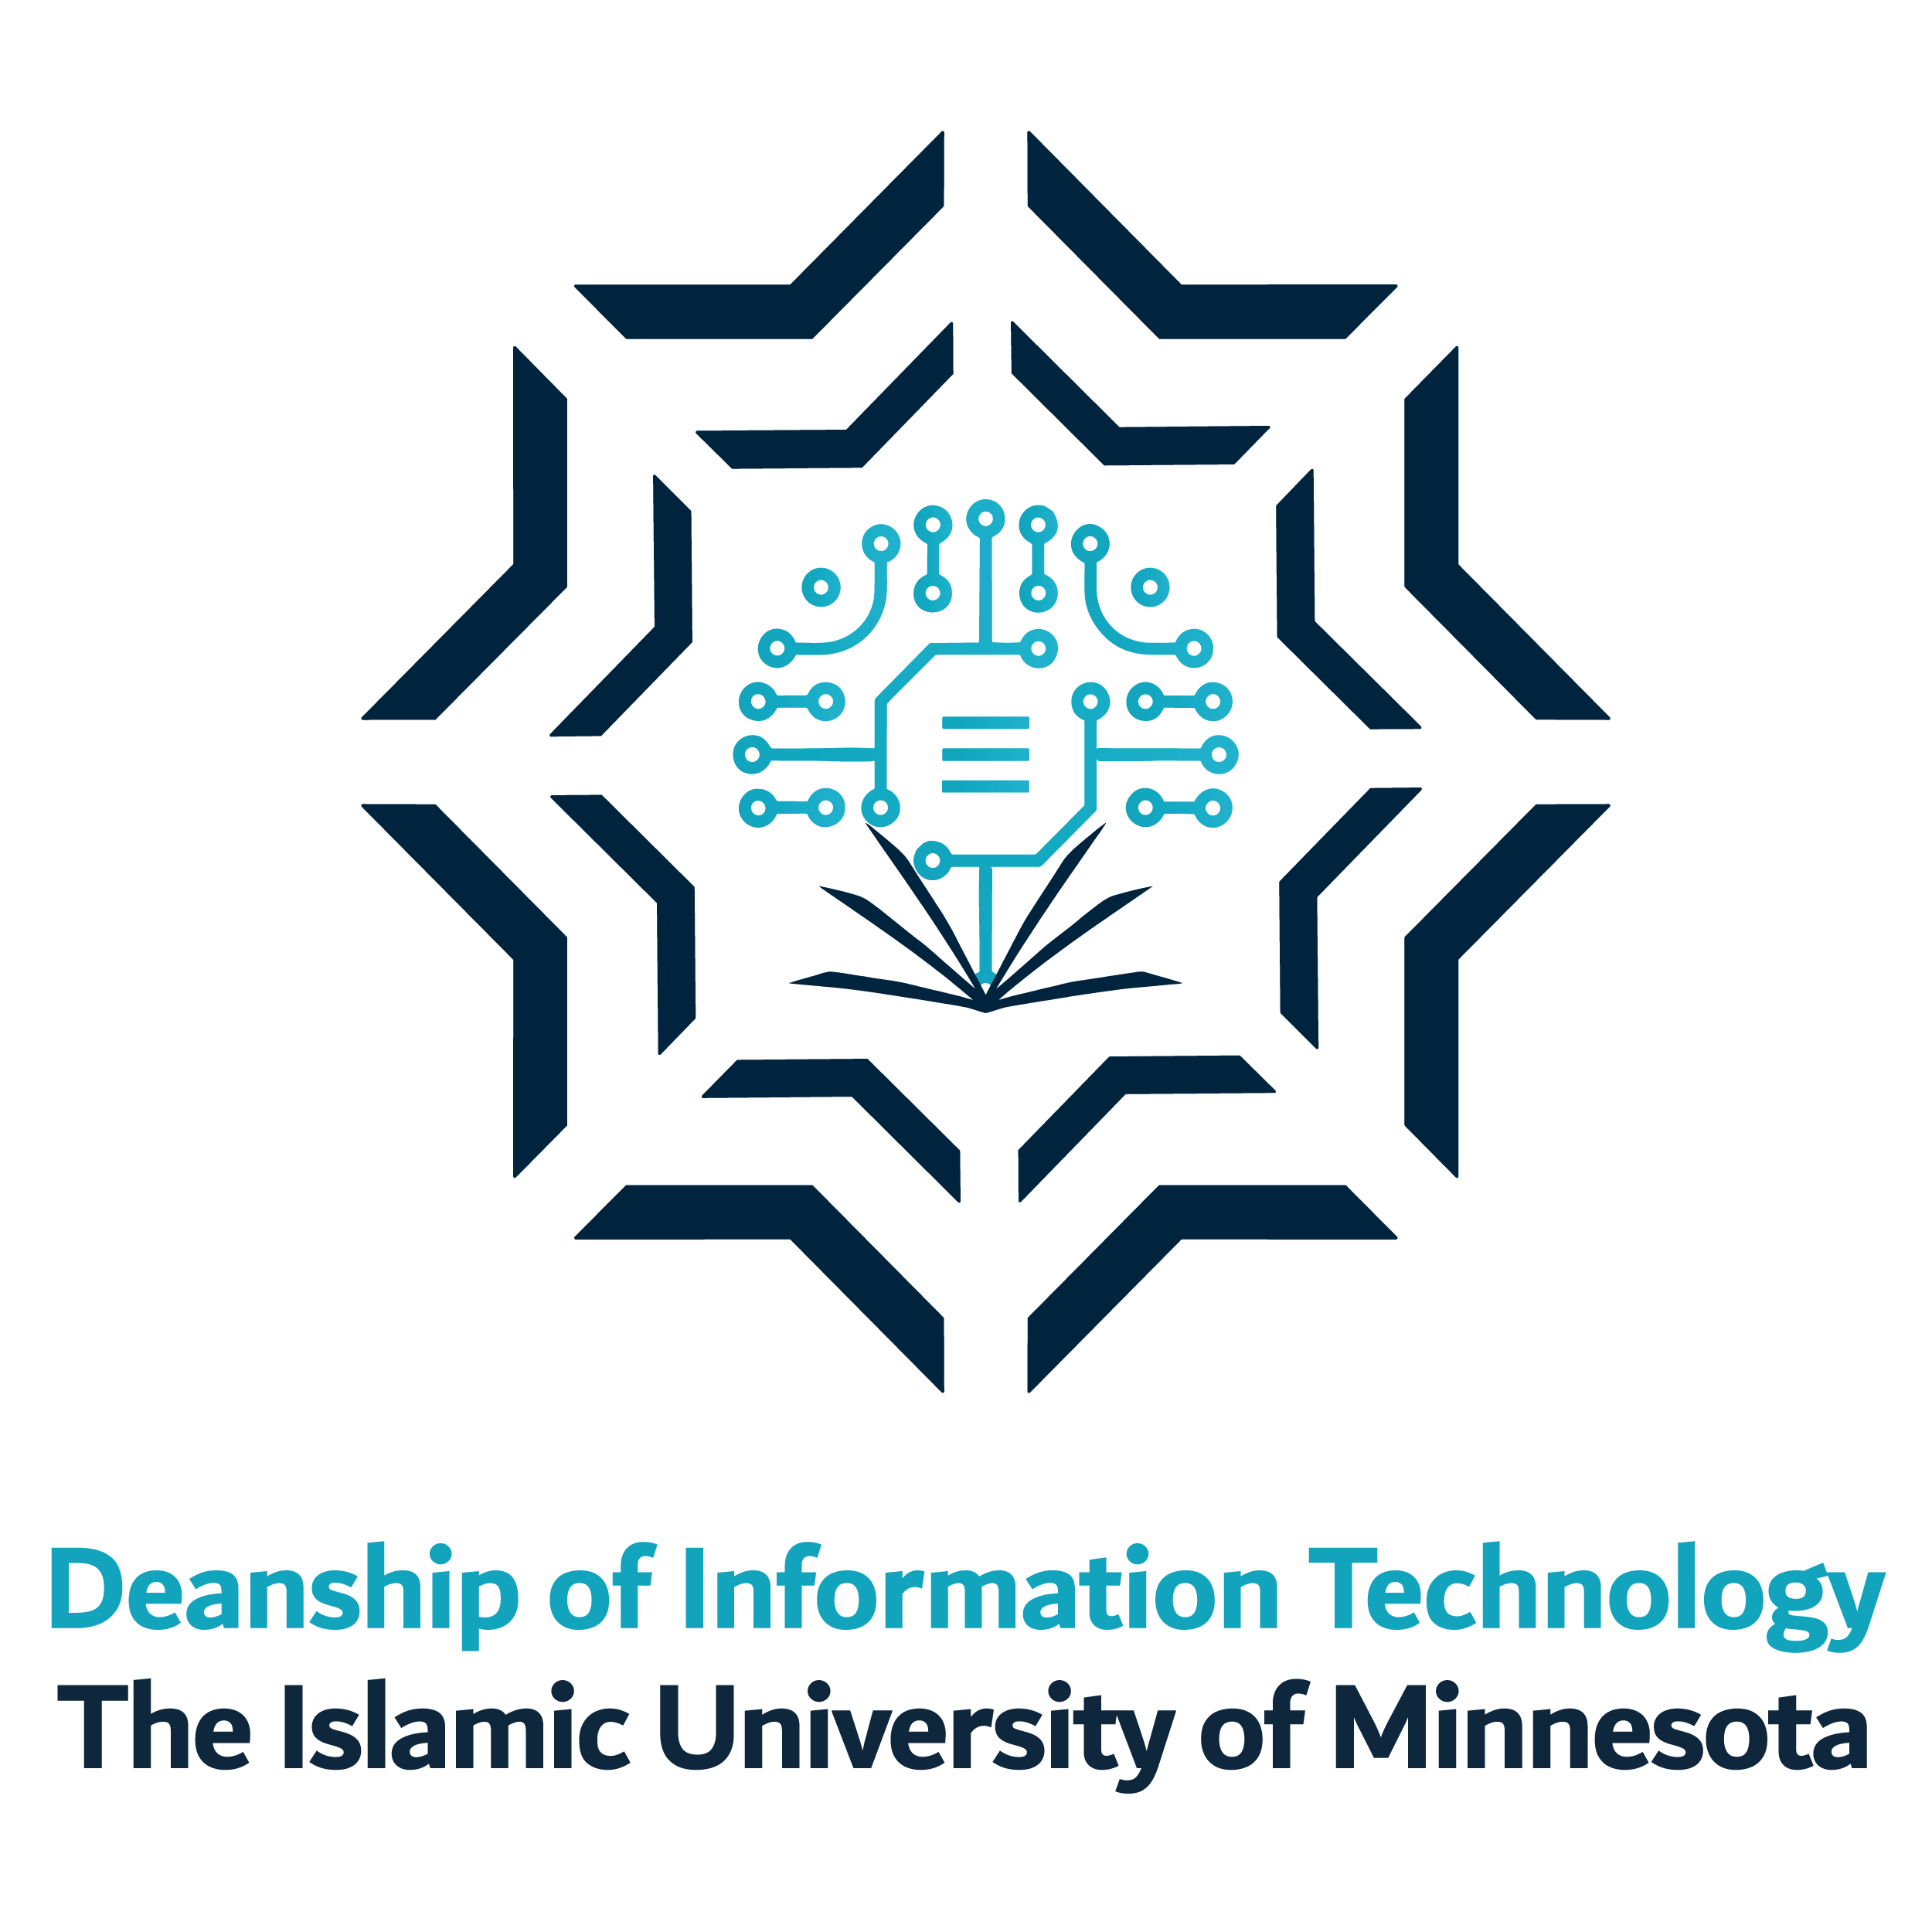 Deanship of Information Technology